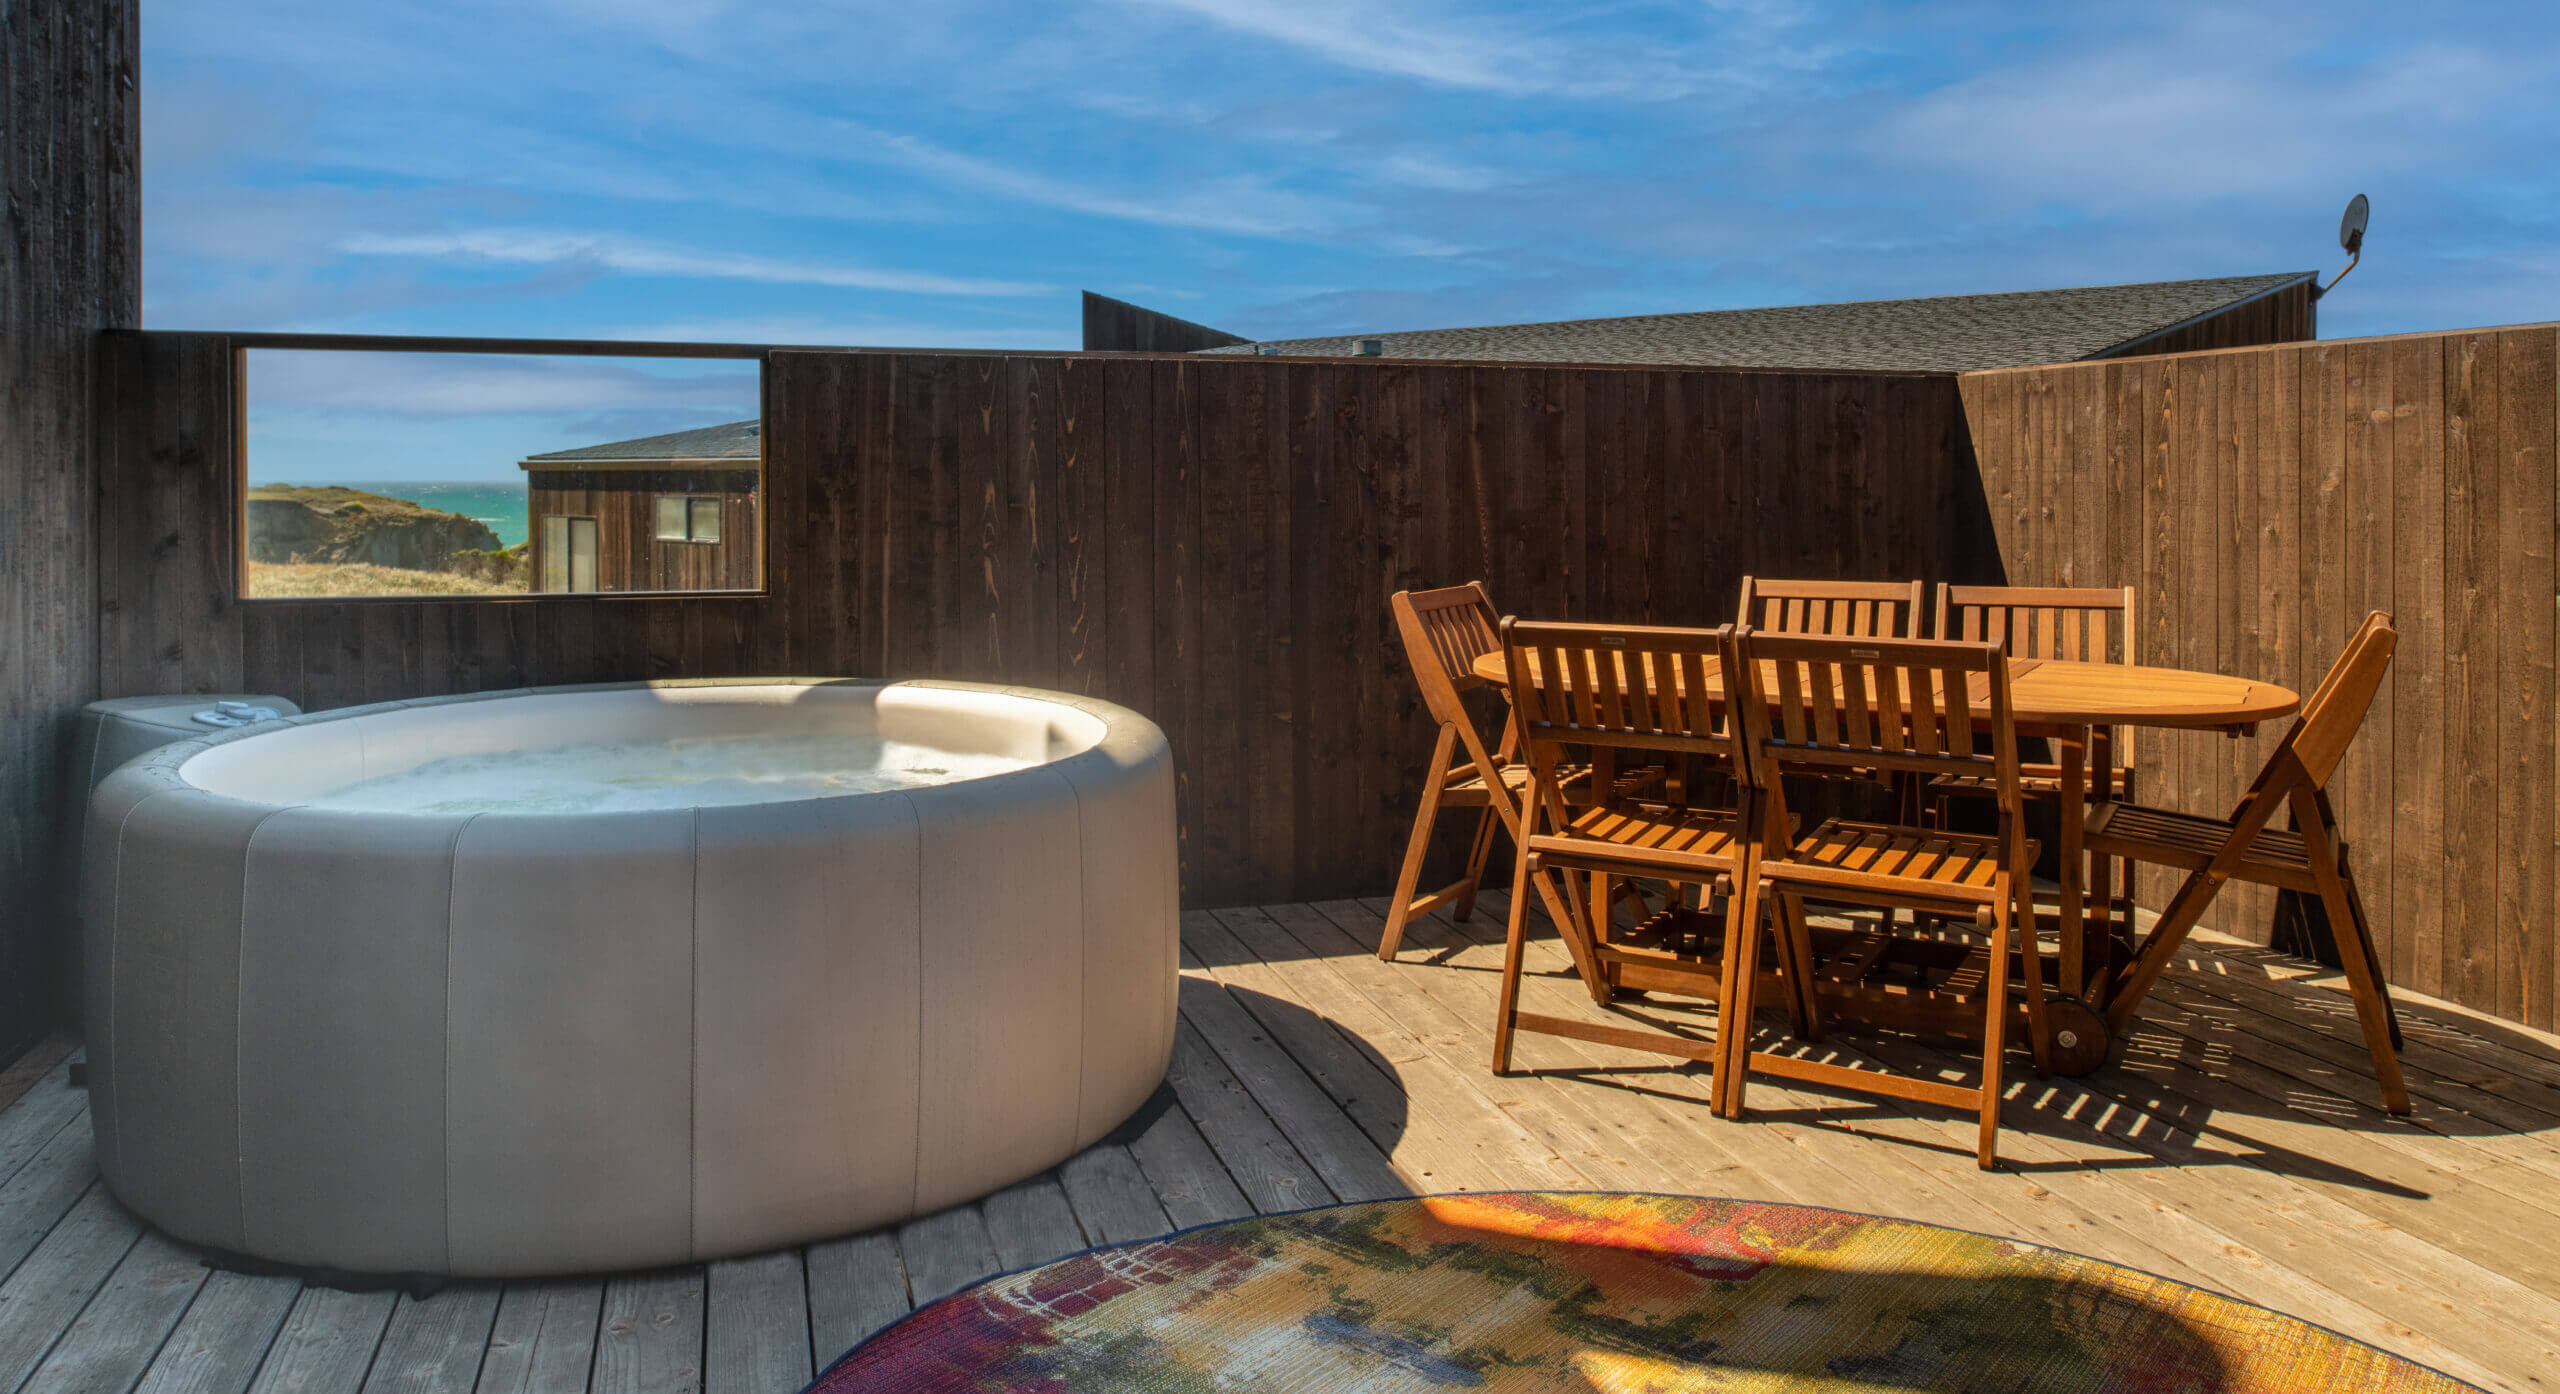 Piper's Dream exterior deck with hot tub and table against blue sky